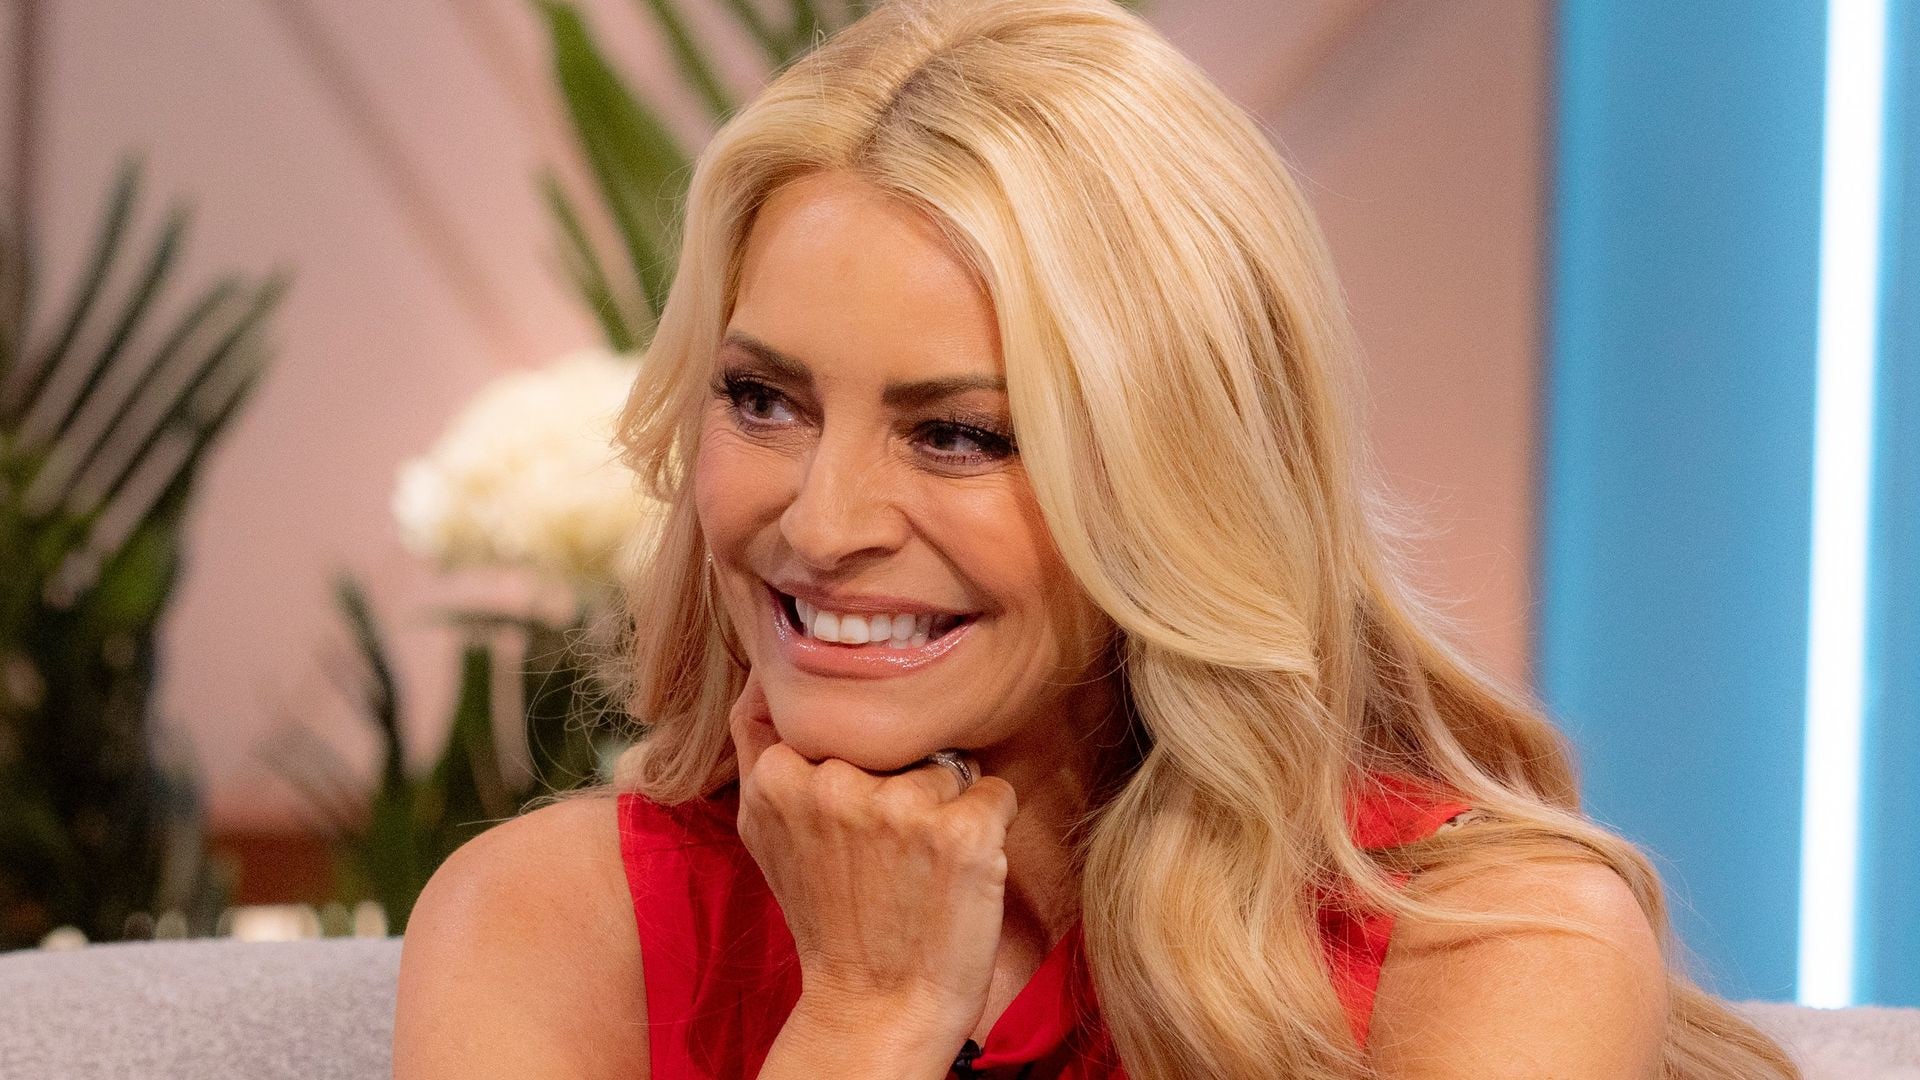 Tess Daly wears a red dress on Lorraine on ITV